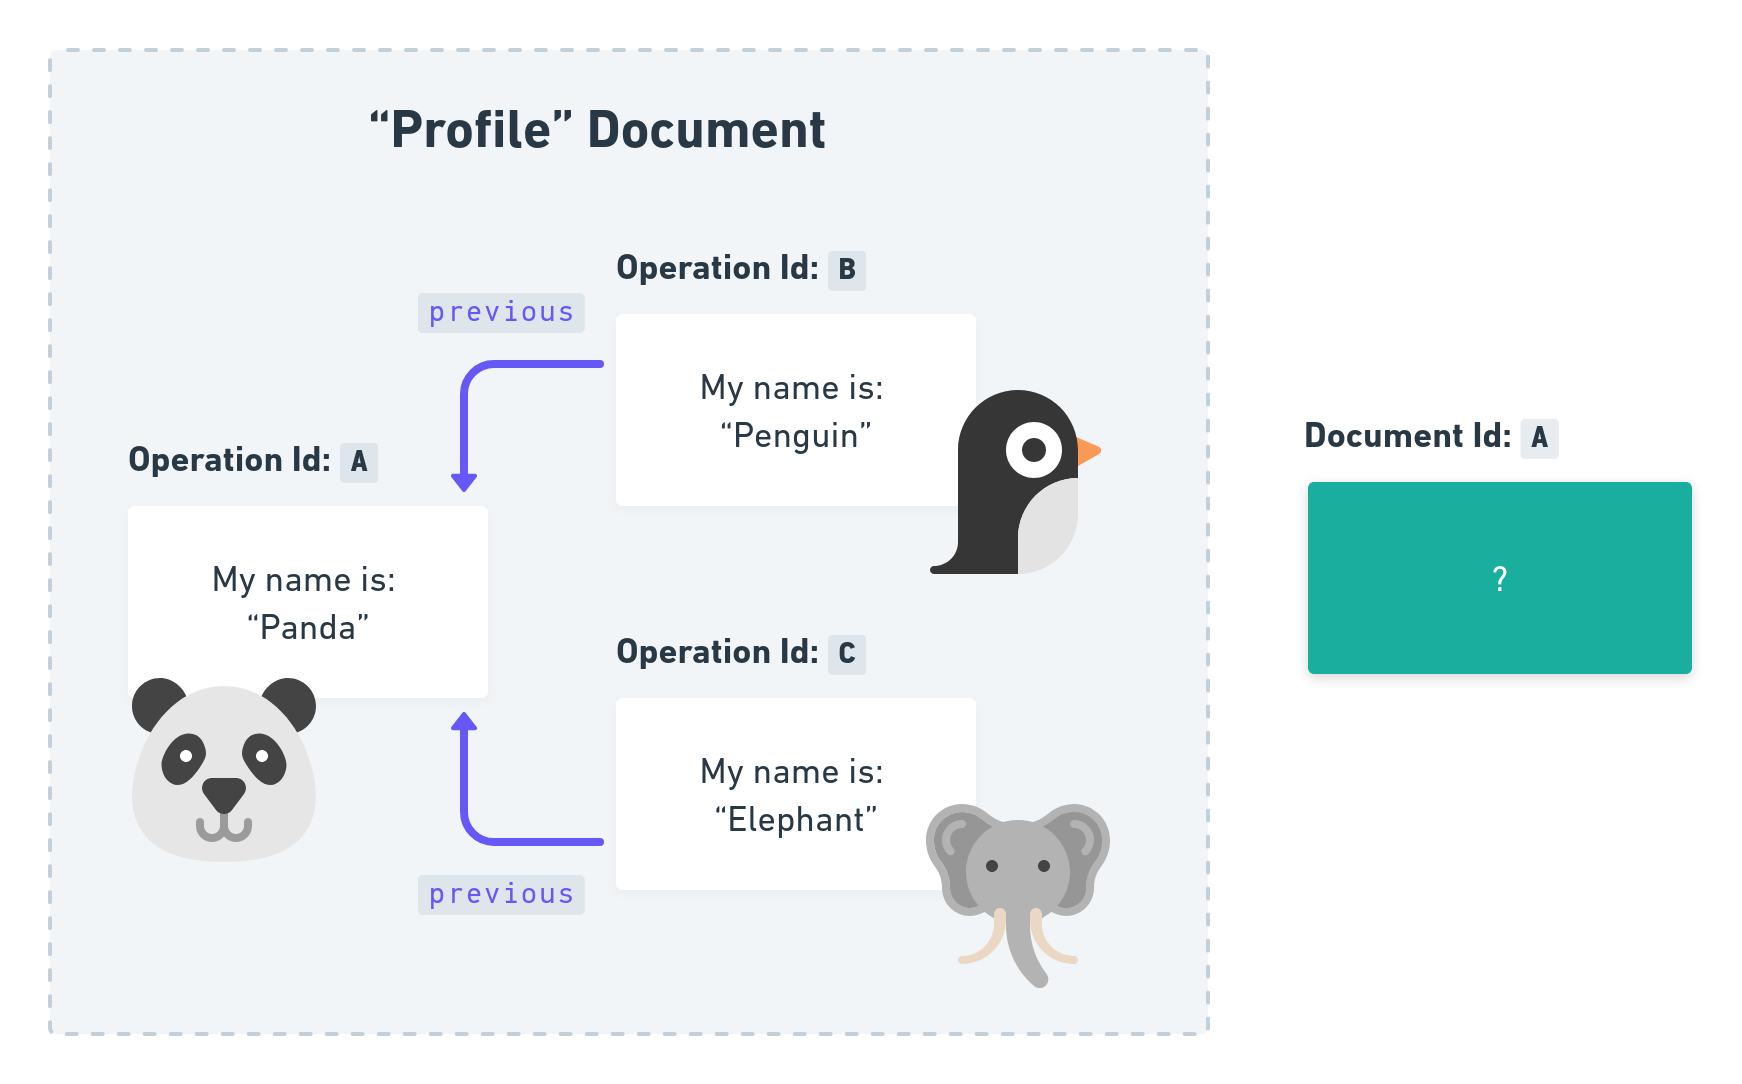 Concurrent updates by Penguin and Elephant